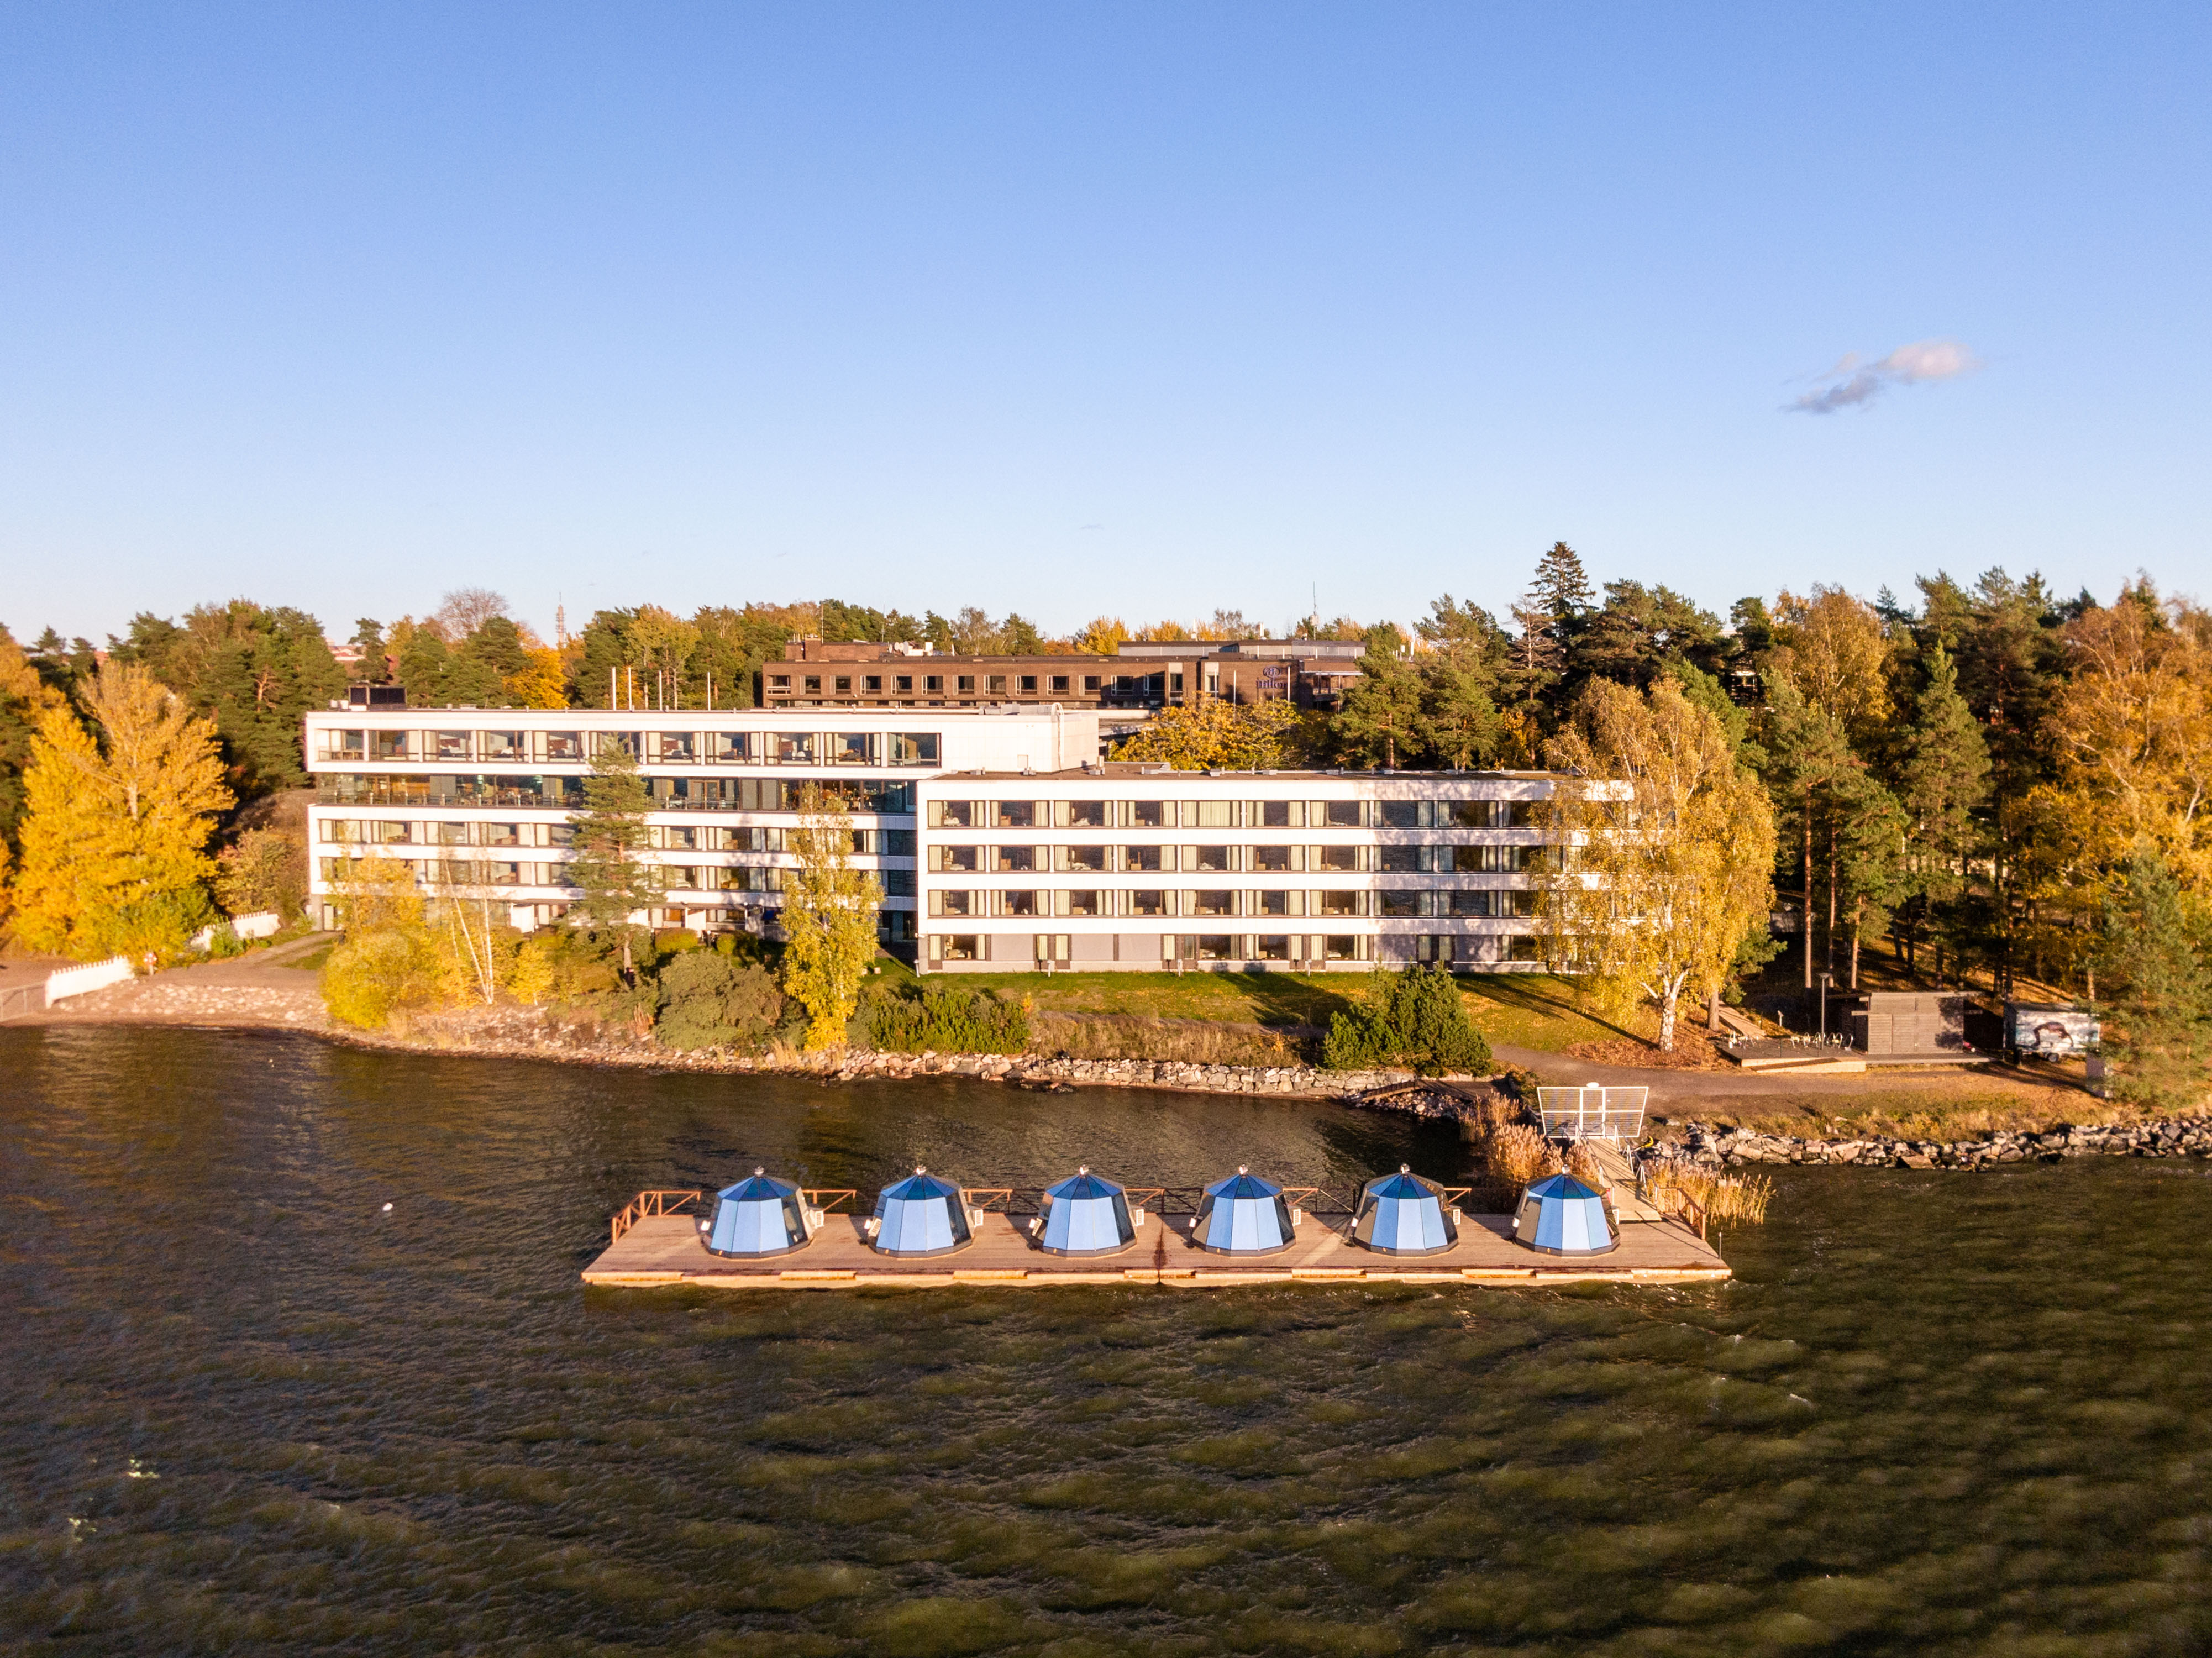 iglux on water with aerial view of hotel